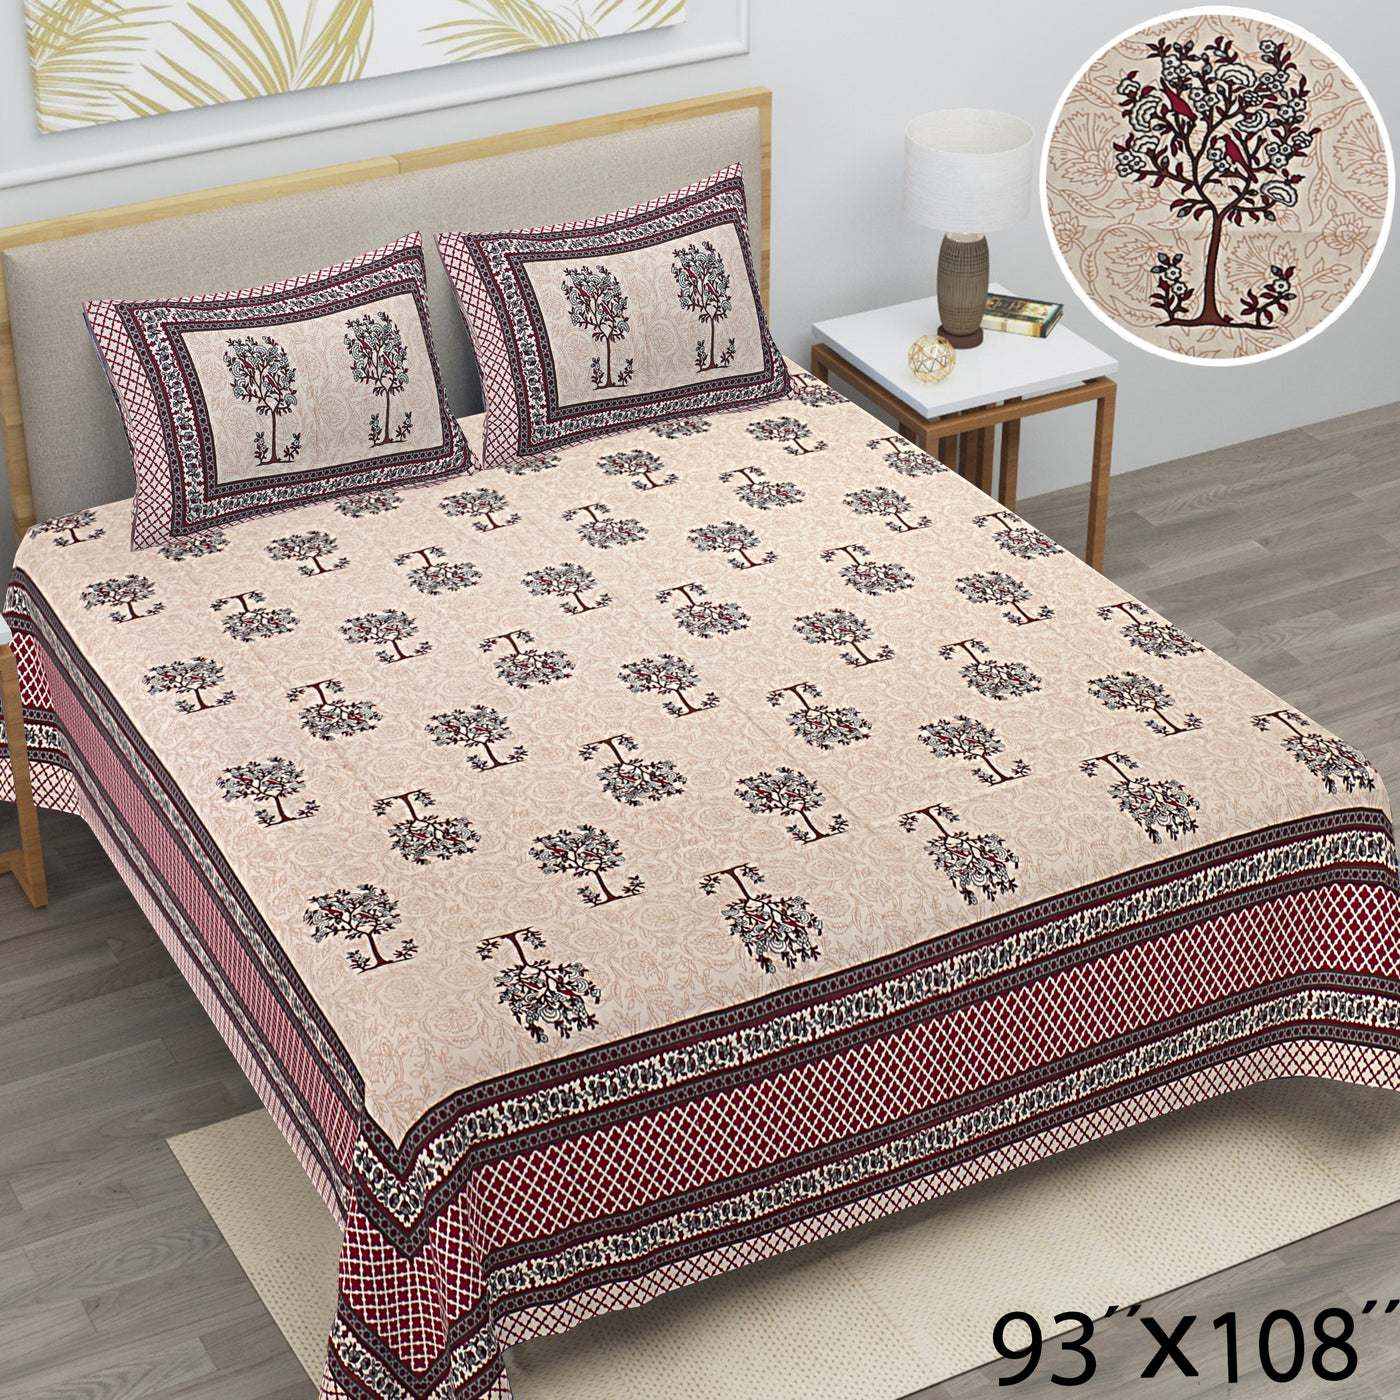 Wanderlust Premium | Full Size 93 x 108 in | 100% Pure Cotton | Double Bedsheet with 2 Pillow Covers (PKC08)